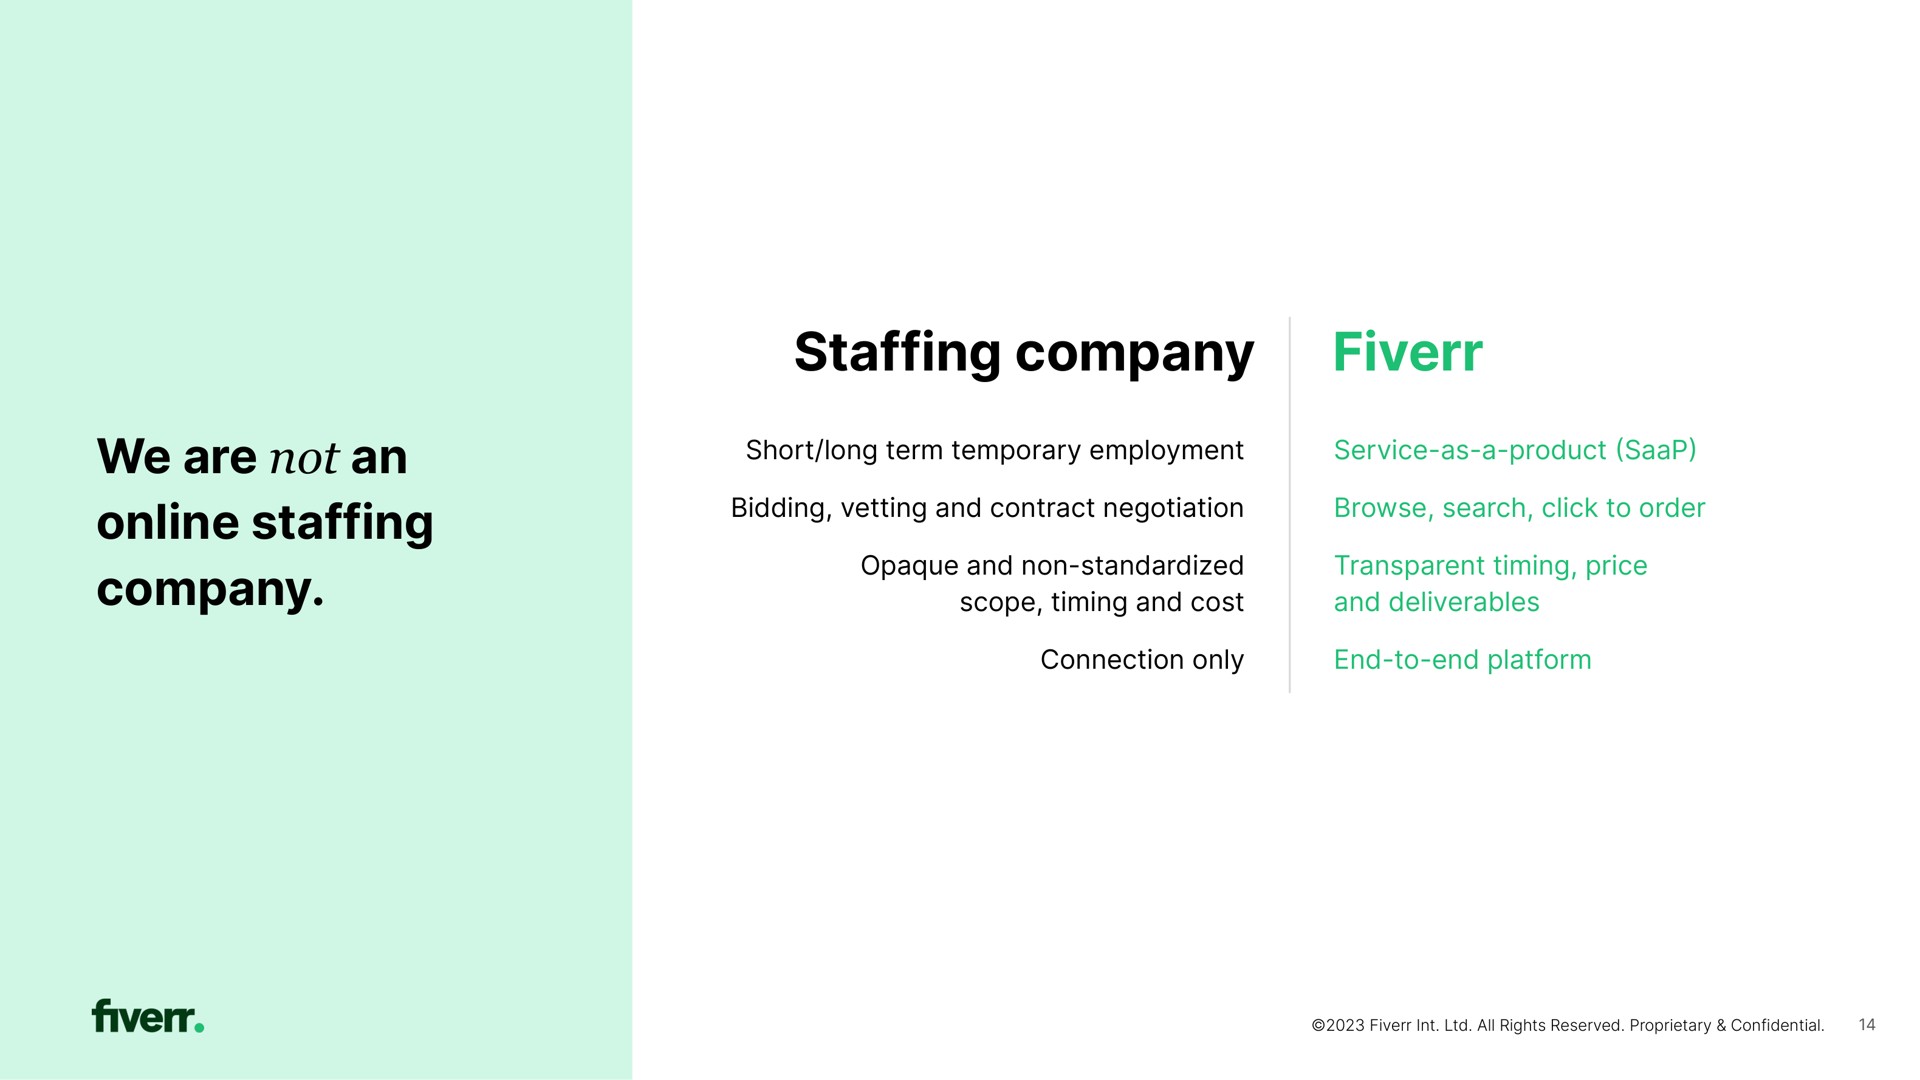 we are not an staffing company staffing company short long term temporary employment service as a product bidding vetting and contract negotiation browse search click to order opaque and non standardized scope timing and cost transparent timing price and deliverables connection only end to end platform | Fiverr